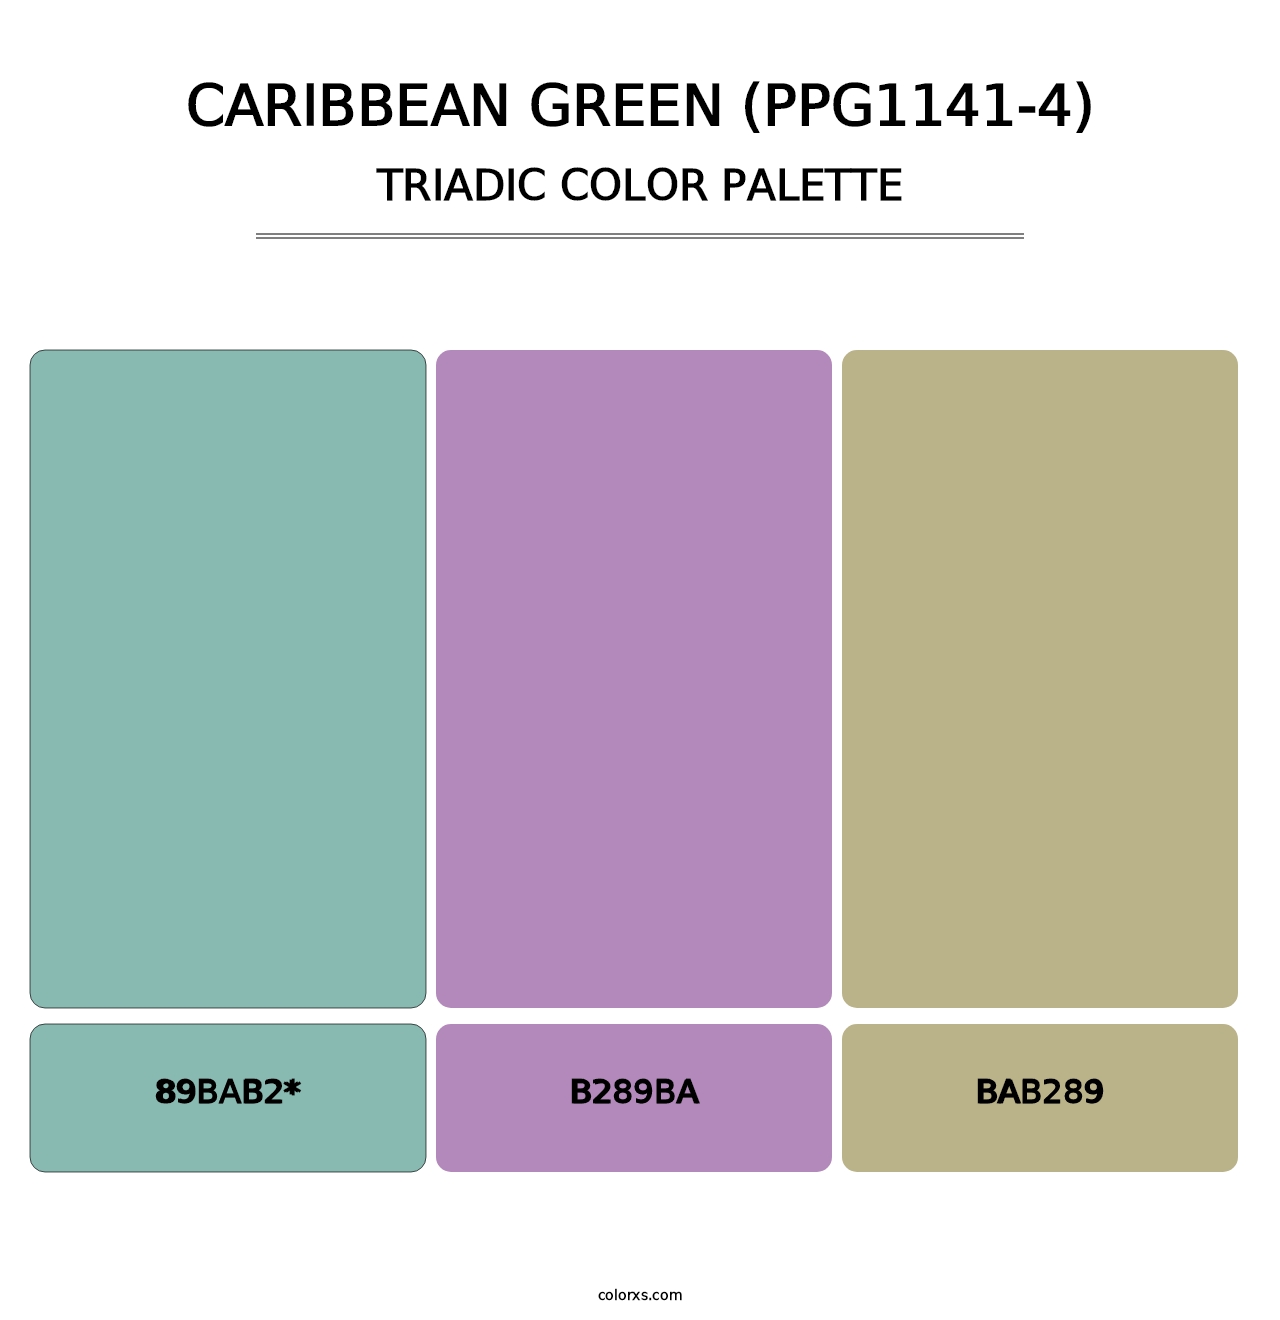 Caribbean Green (PPG1141-4) - Triadic Color Palette